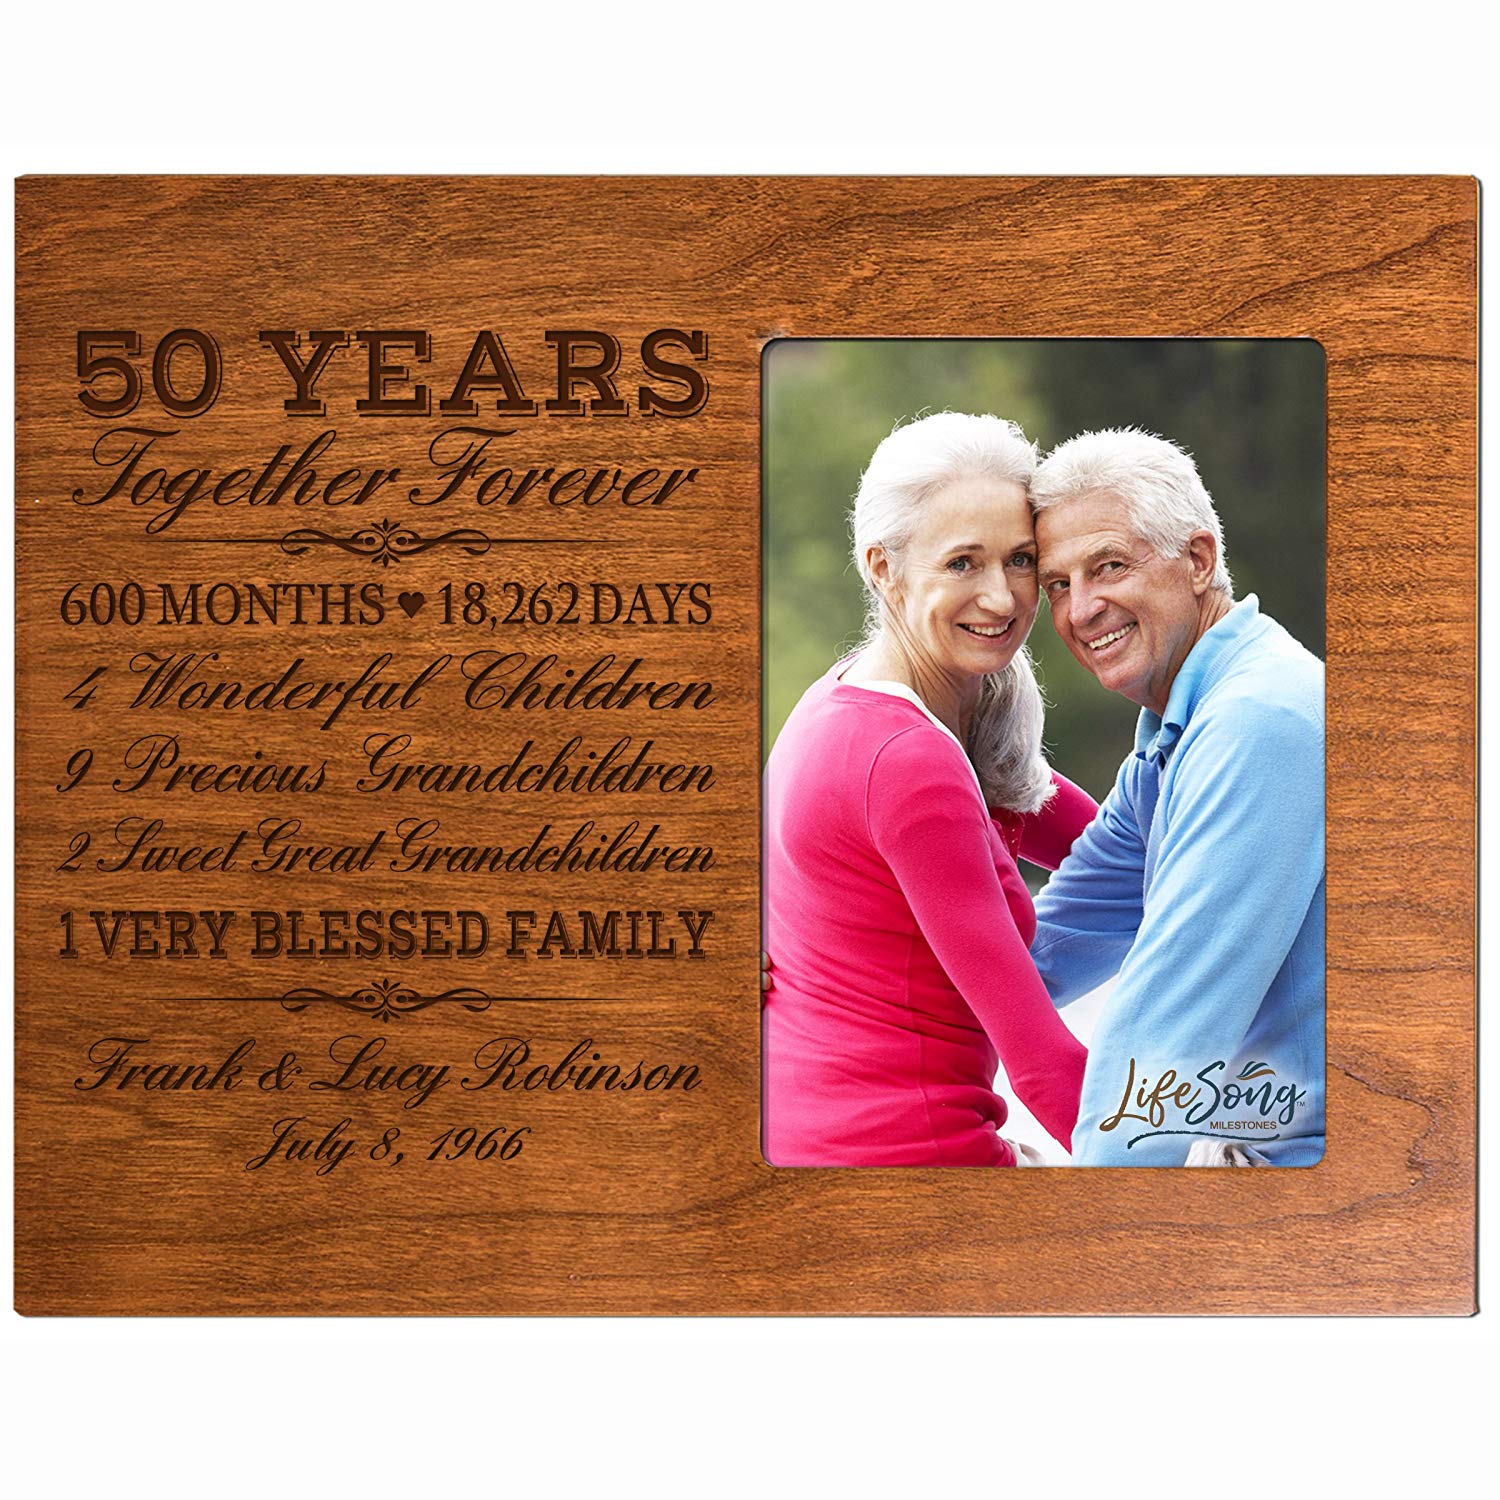 Lifesong Milestones Personalized Unique 50th Wedding Anniversary Picture Frame for Couples